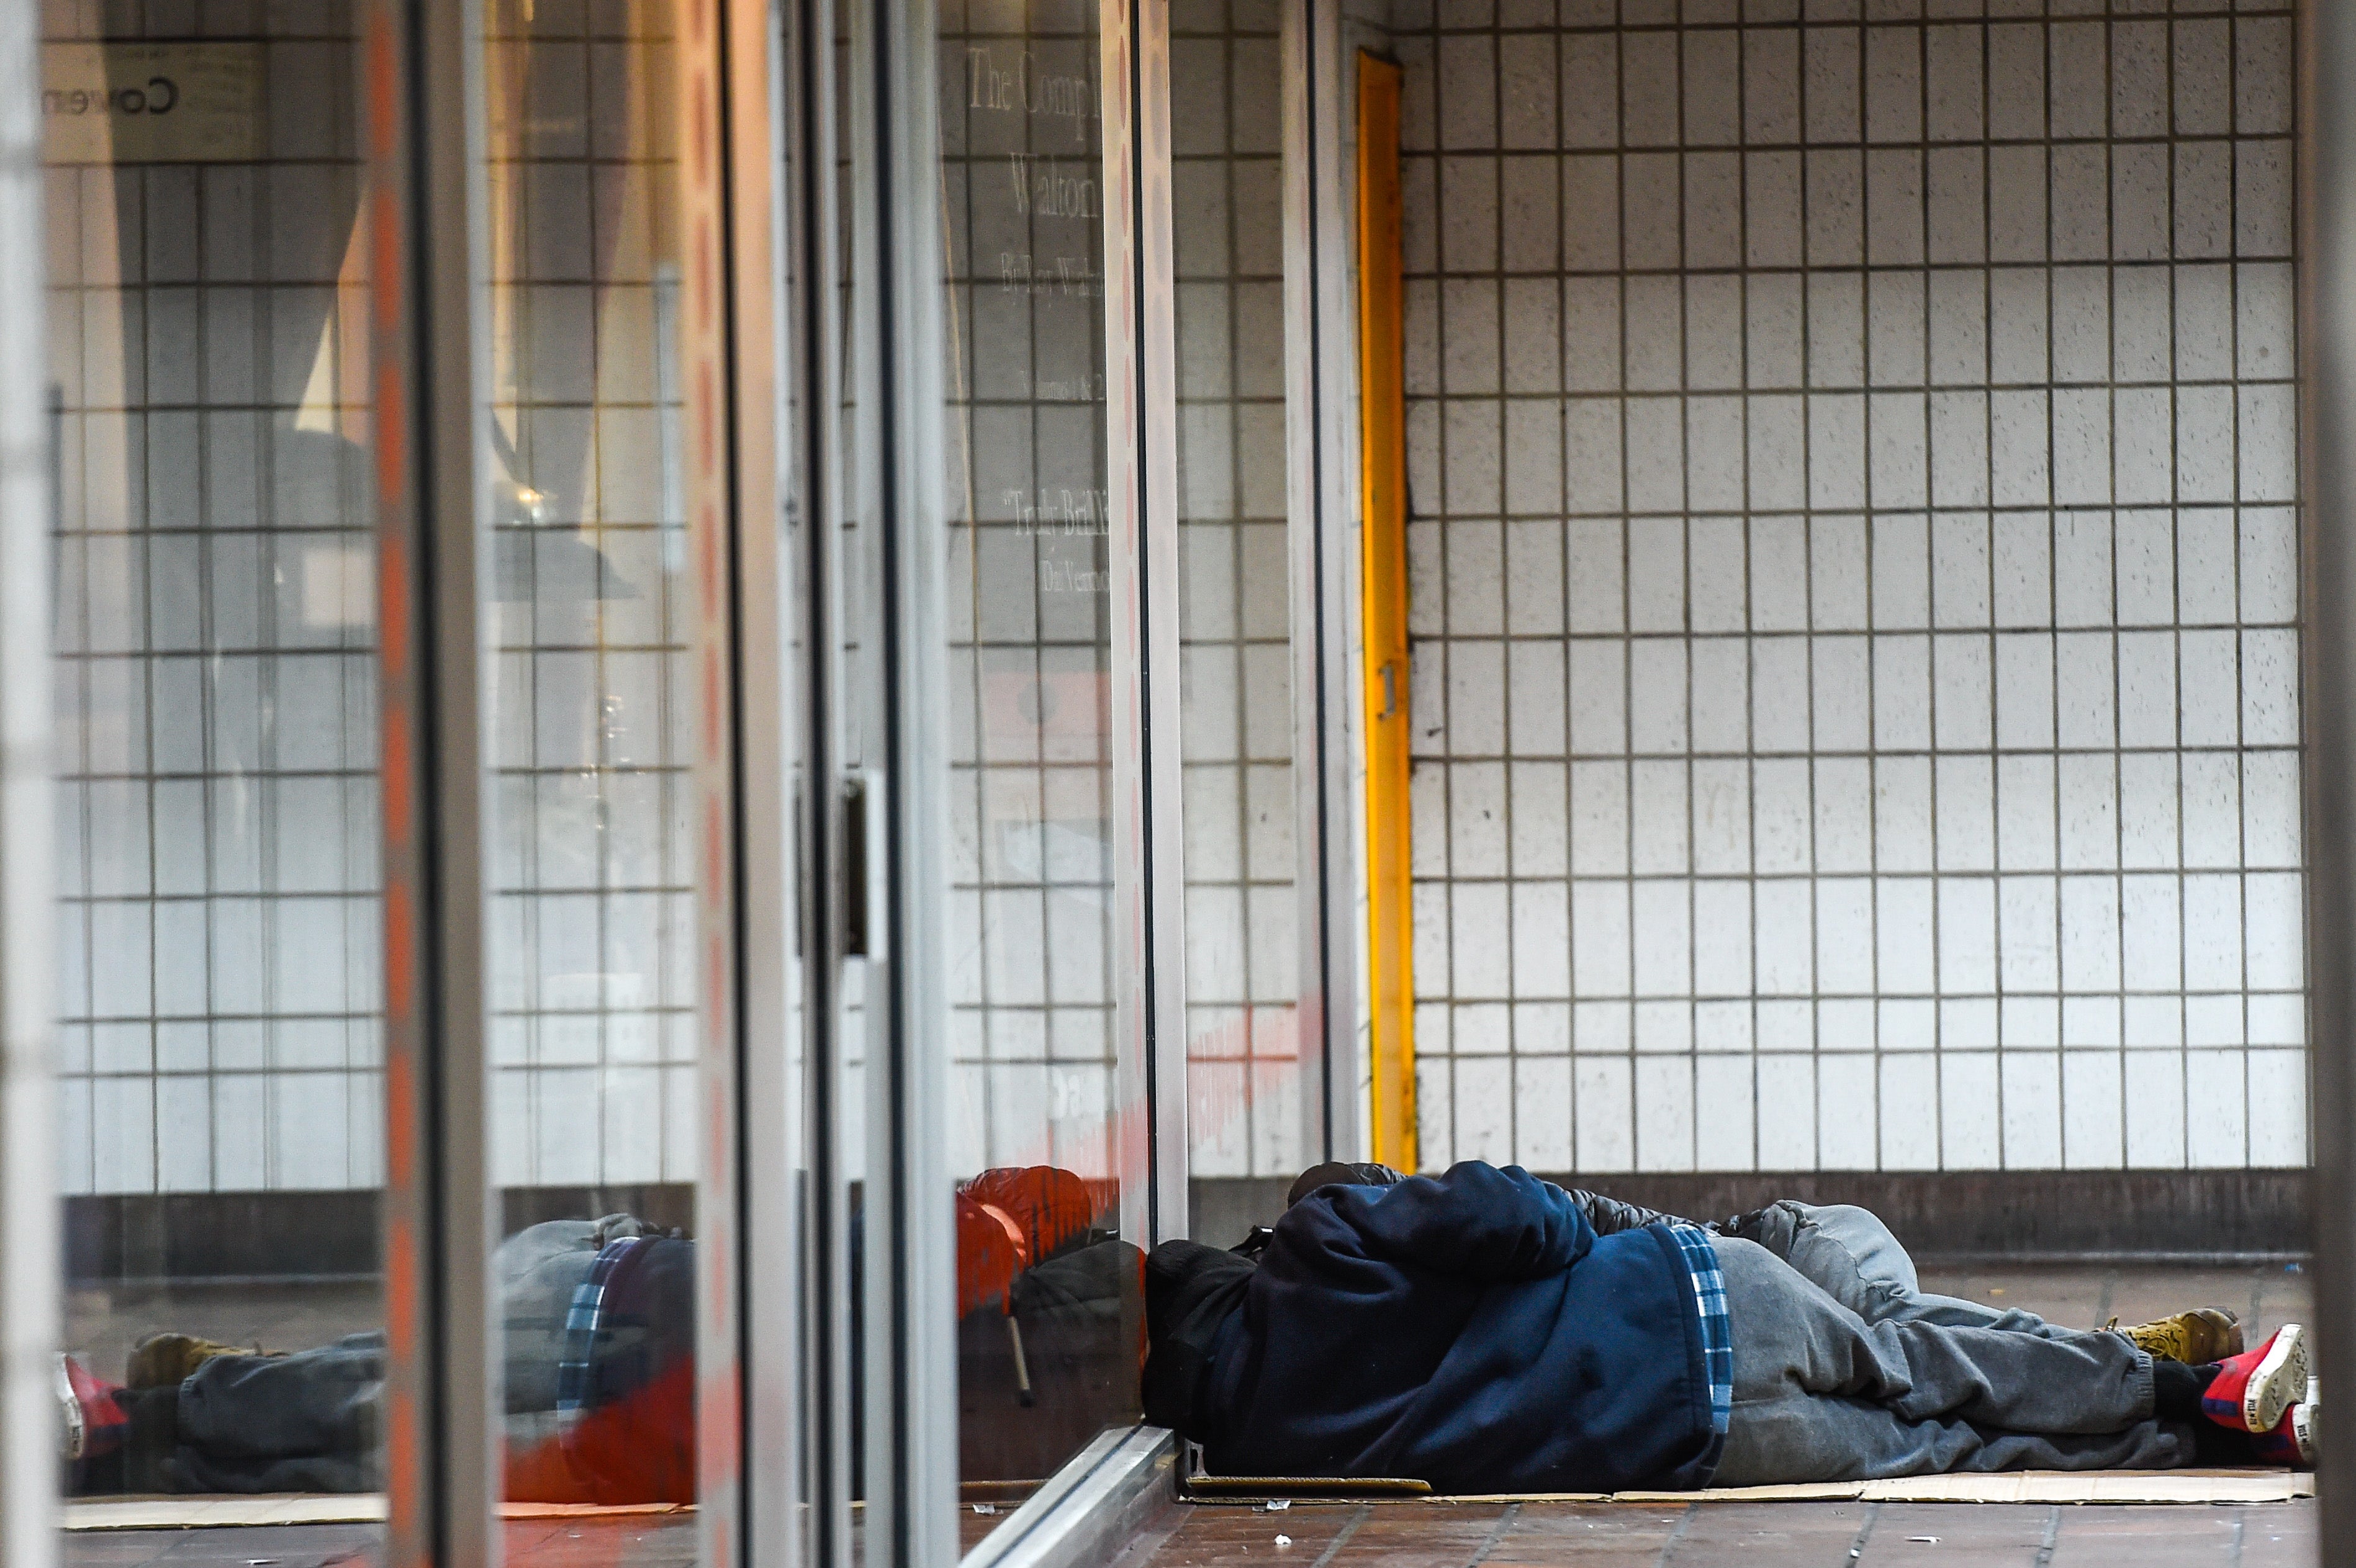 Data published by the Office for National Statistics (ONS) show suicides among homeless individuals surged by nearly a third (30 per cent) in a year